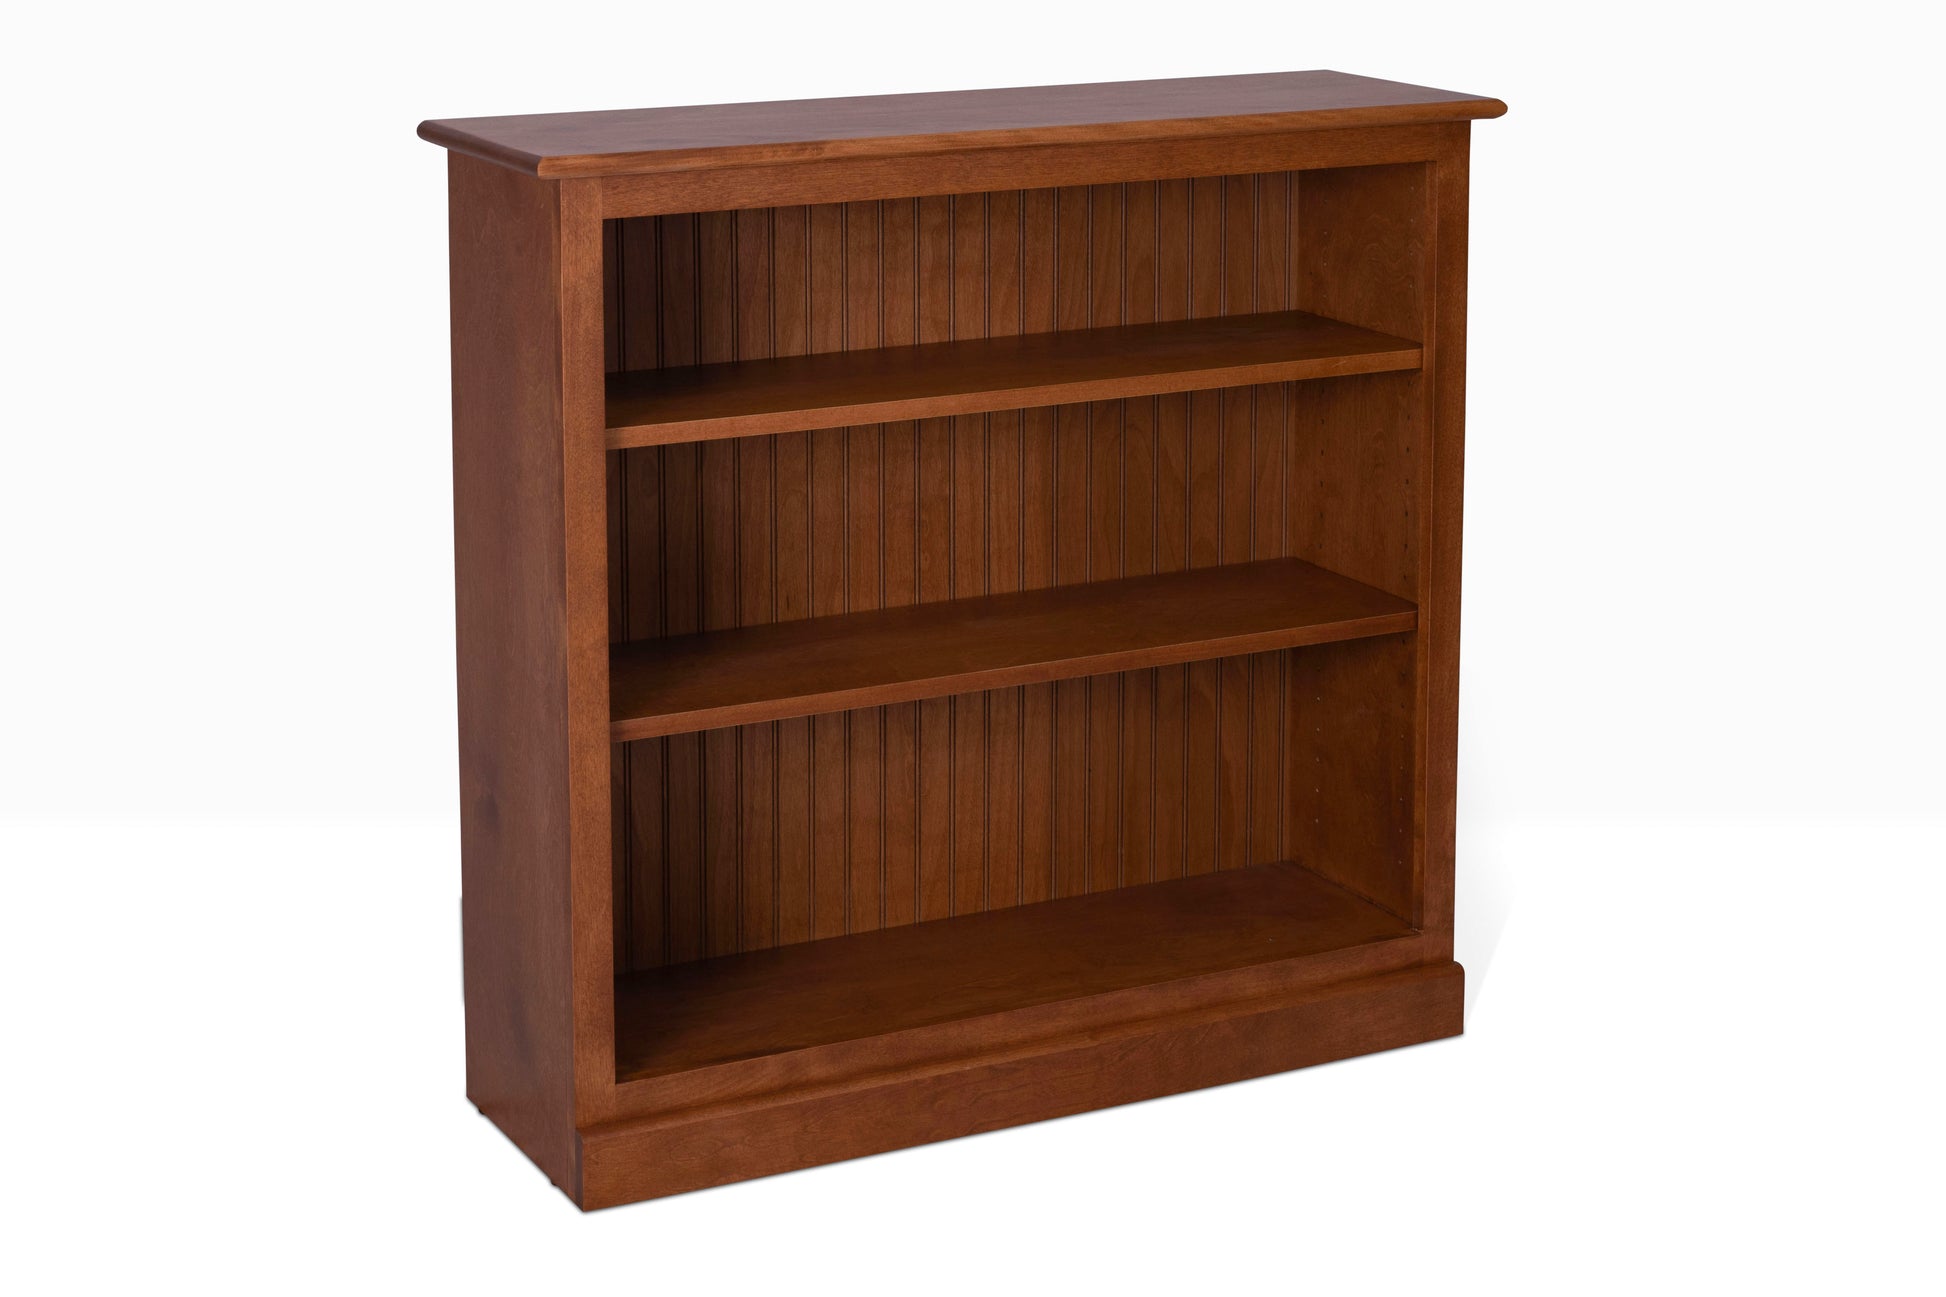 Acadia Cottage Bookcases: Rustic and charming design, nutmeg finish, fits perfectly in smaller spaces with 12" depth. Shelving is adjustable.